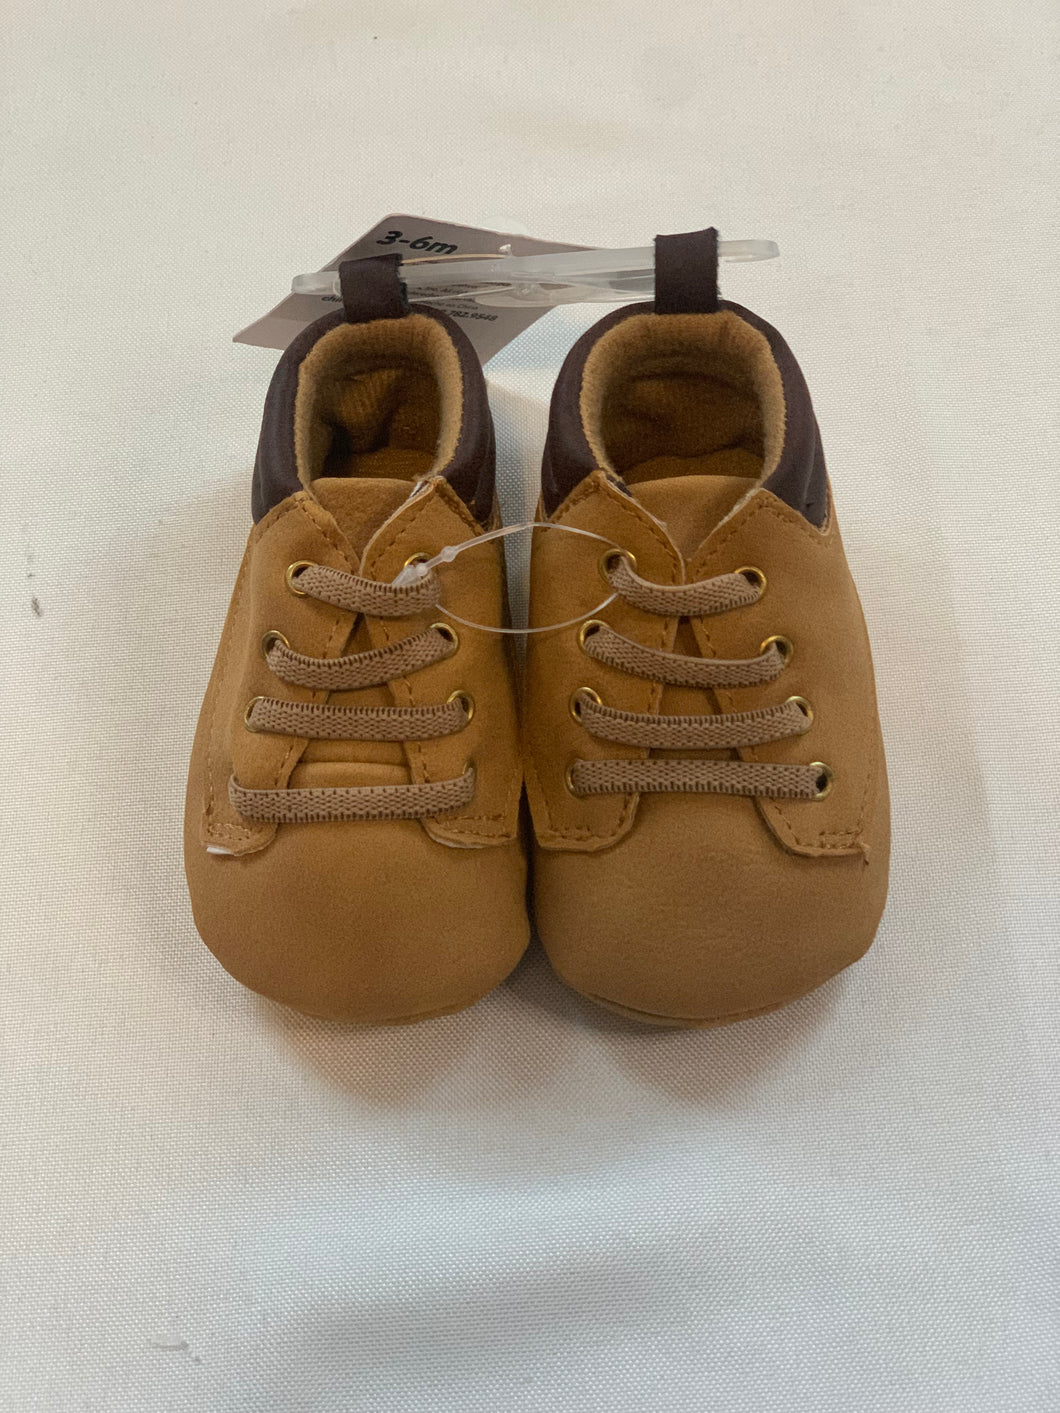 Shoes NWT, Size 3-6m